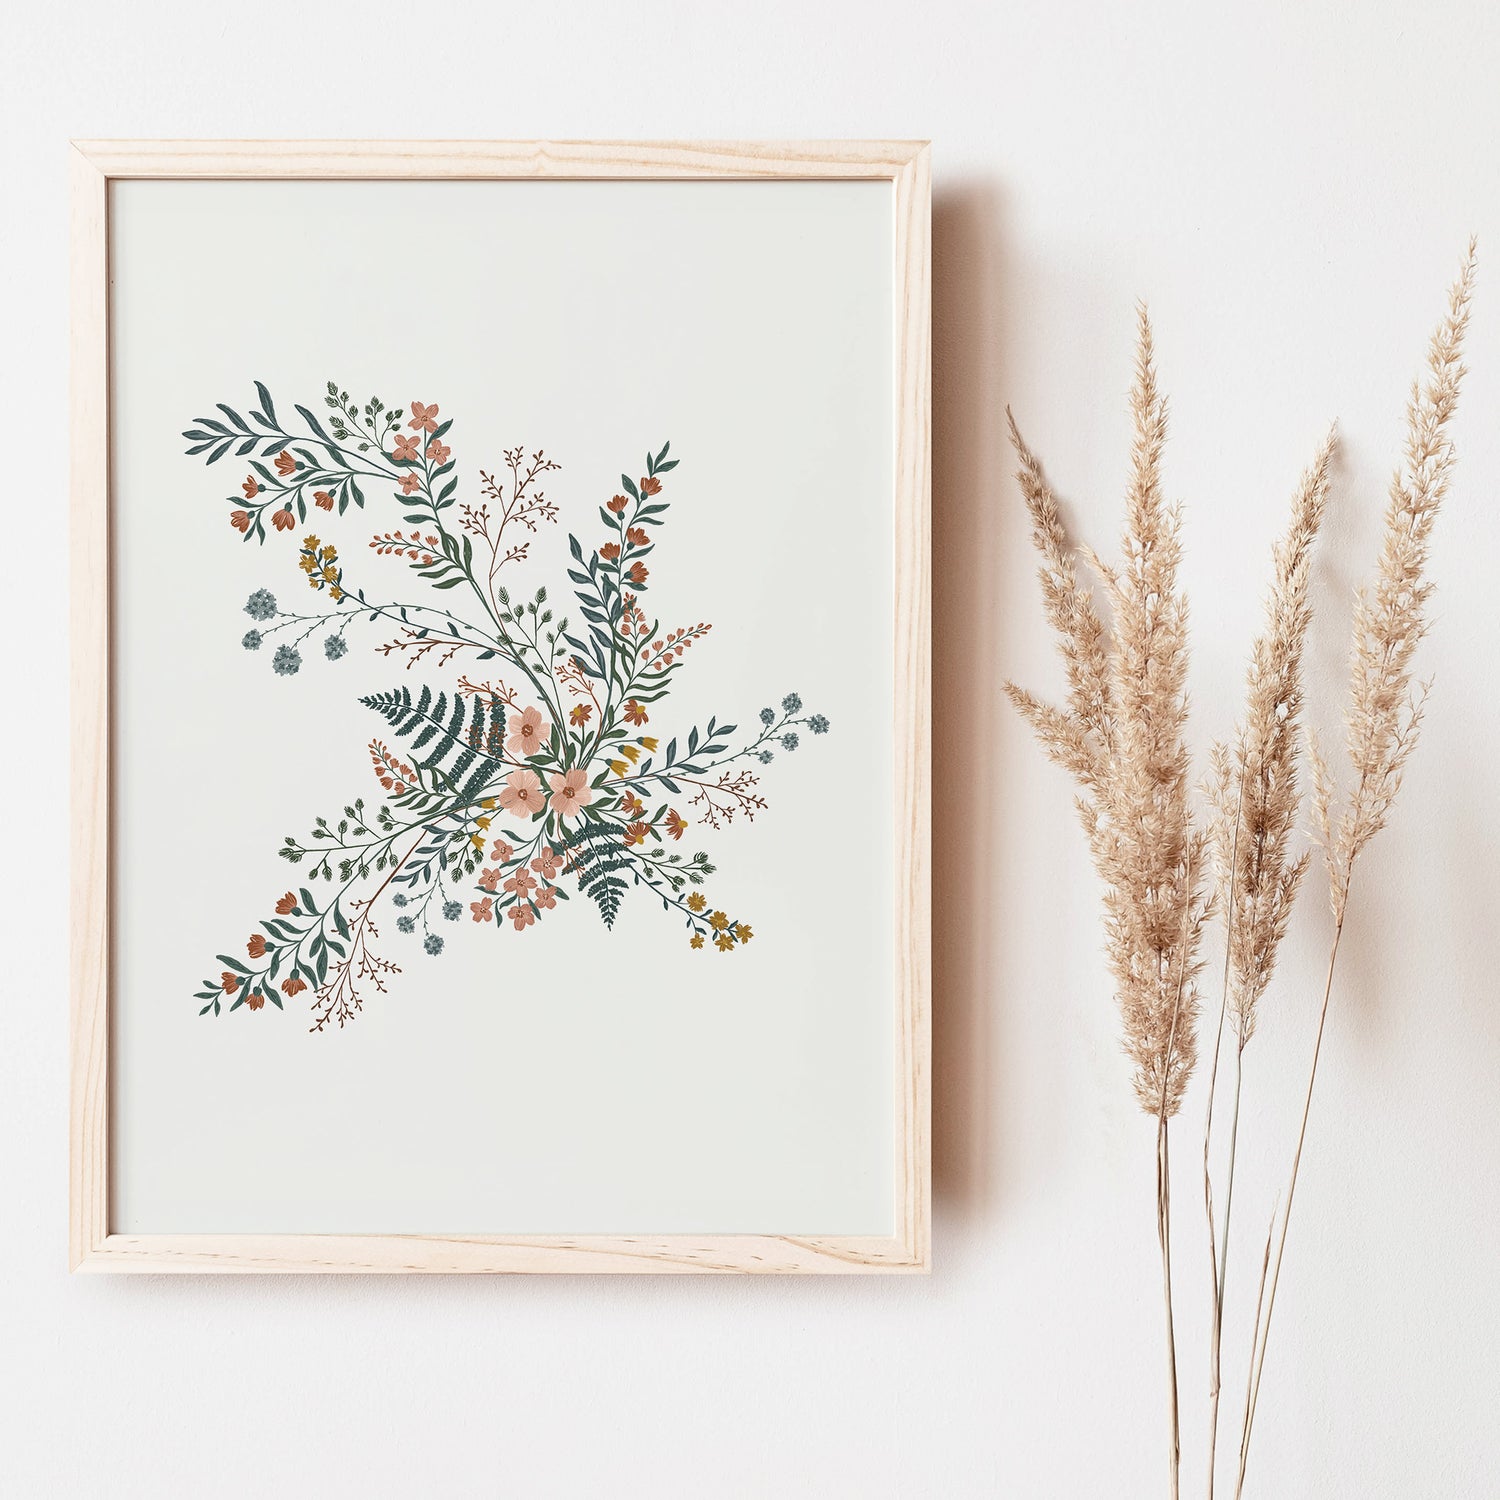 Art print of Floral I featured in a wooden frame that depicts a beautiful bouquet of fresh-picked flowers from the meadow.